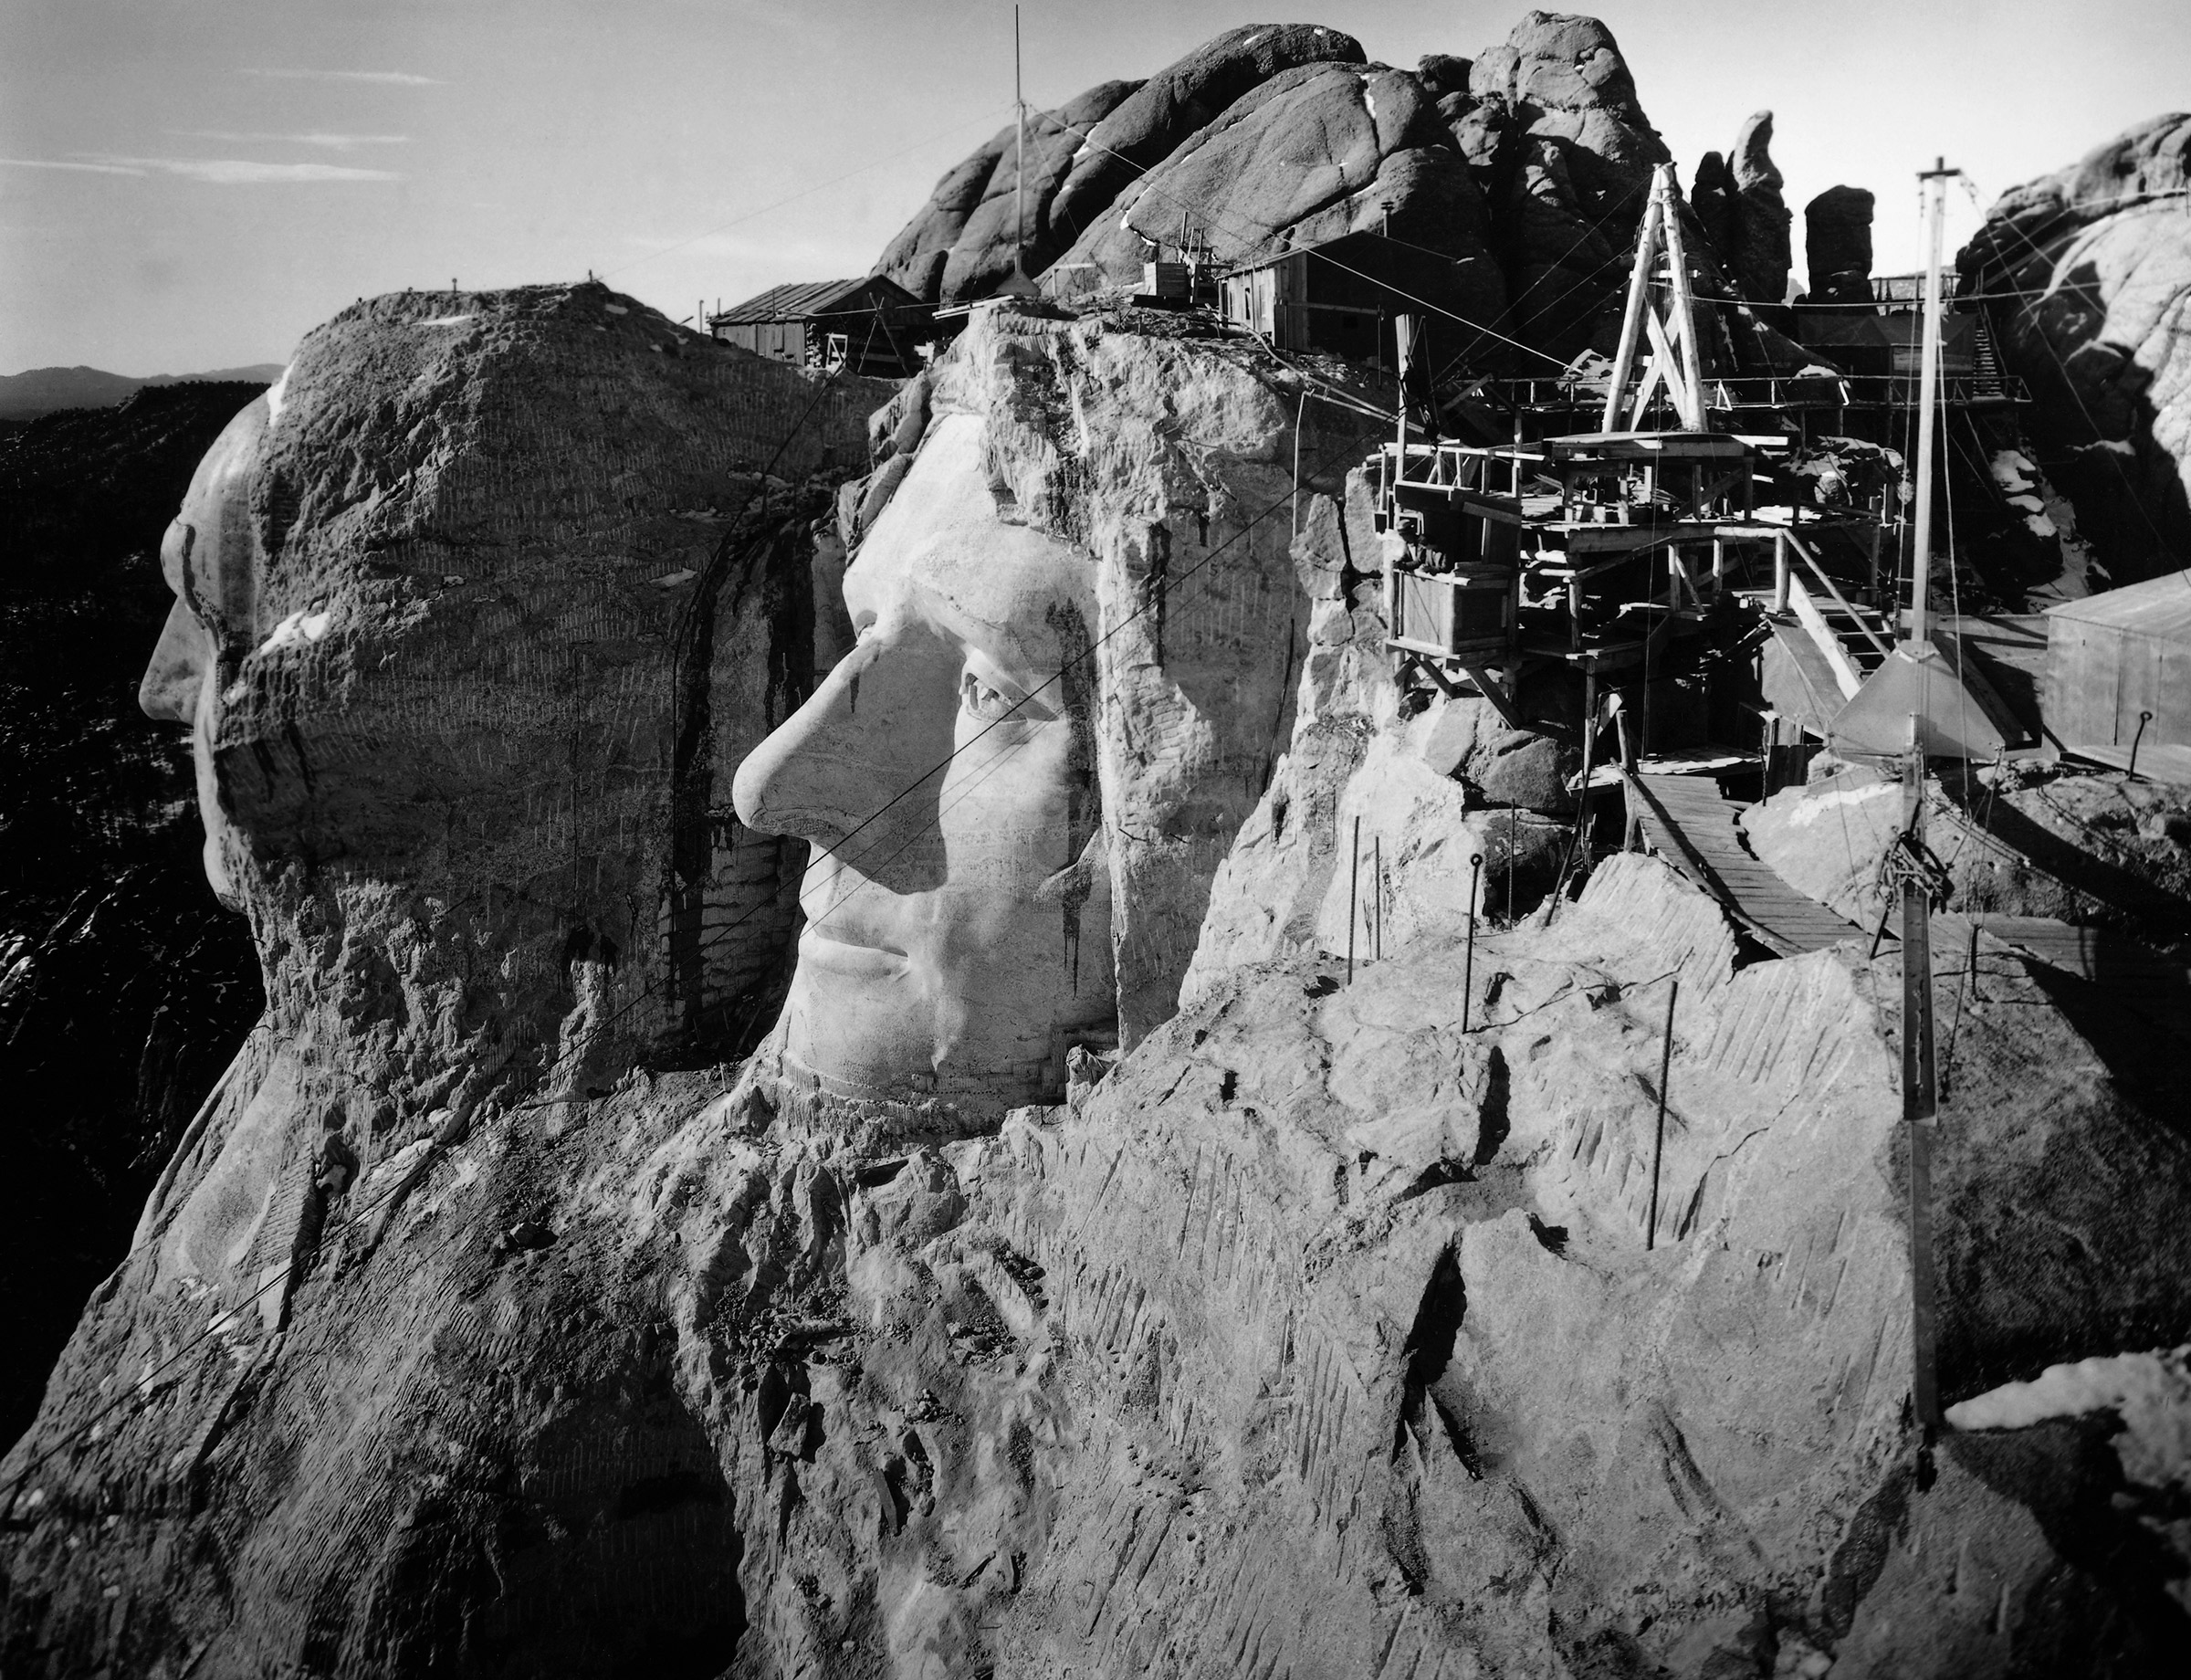 Mount Rushmore, South Dakota: The head of Washington and Jefferson from the top of Lincoln's head. Undated photograph. Ca. 1940s. (Bettman Archives/Getty Images)